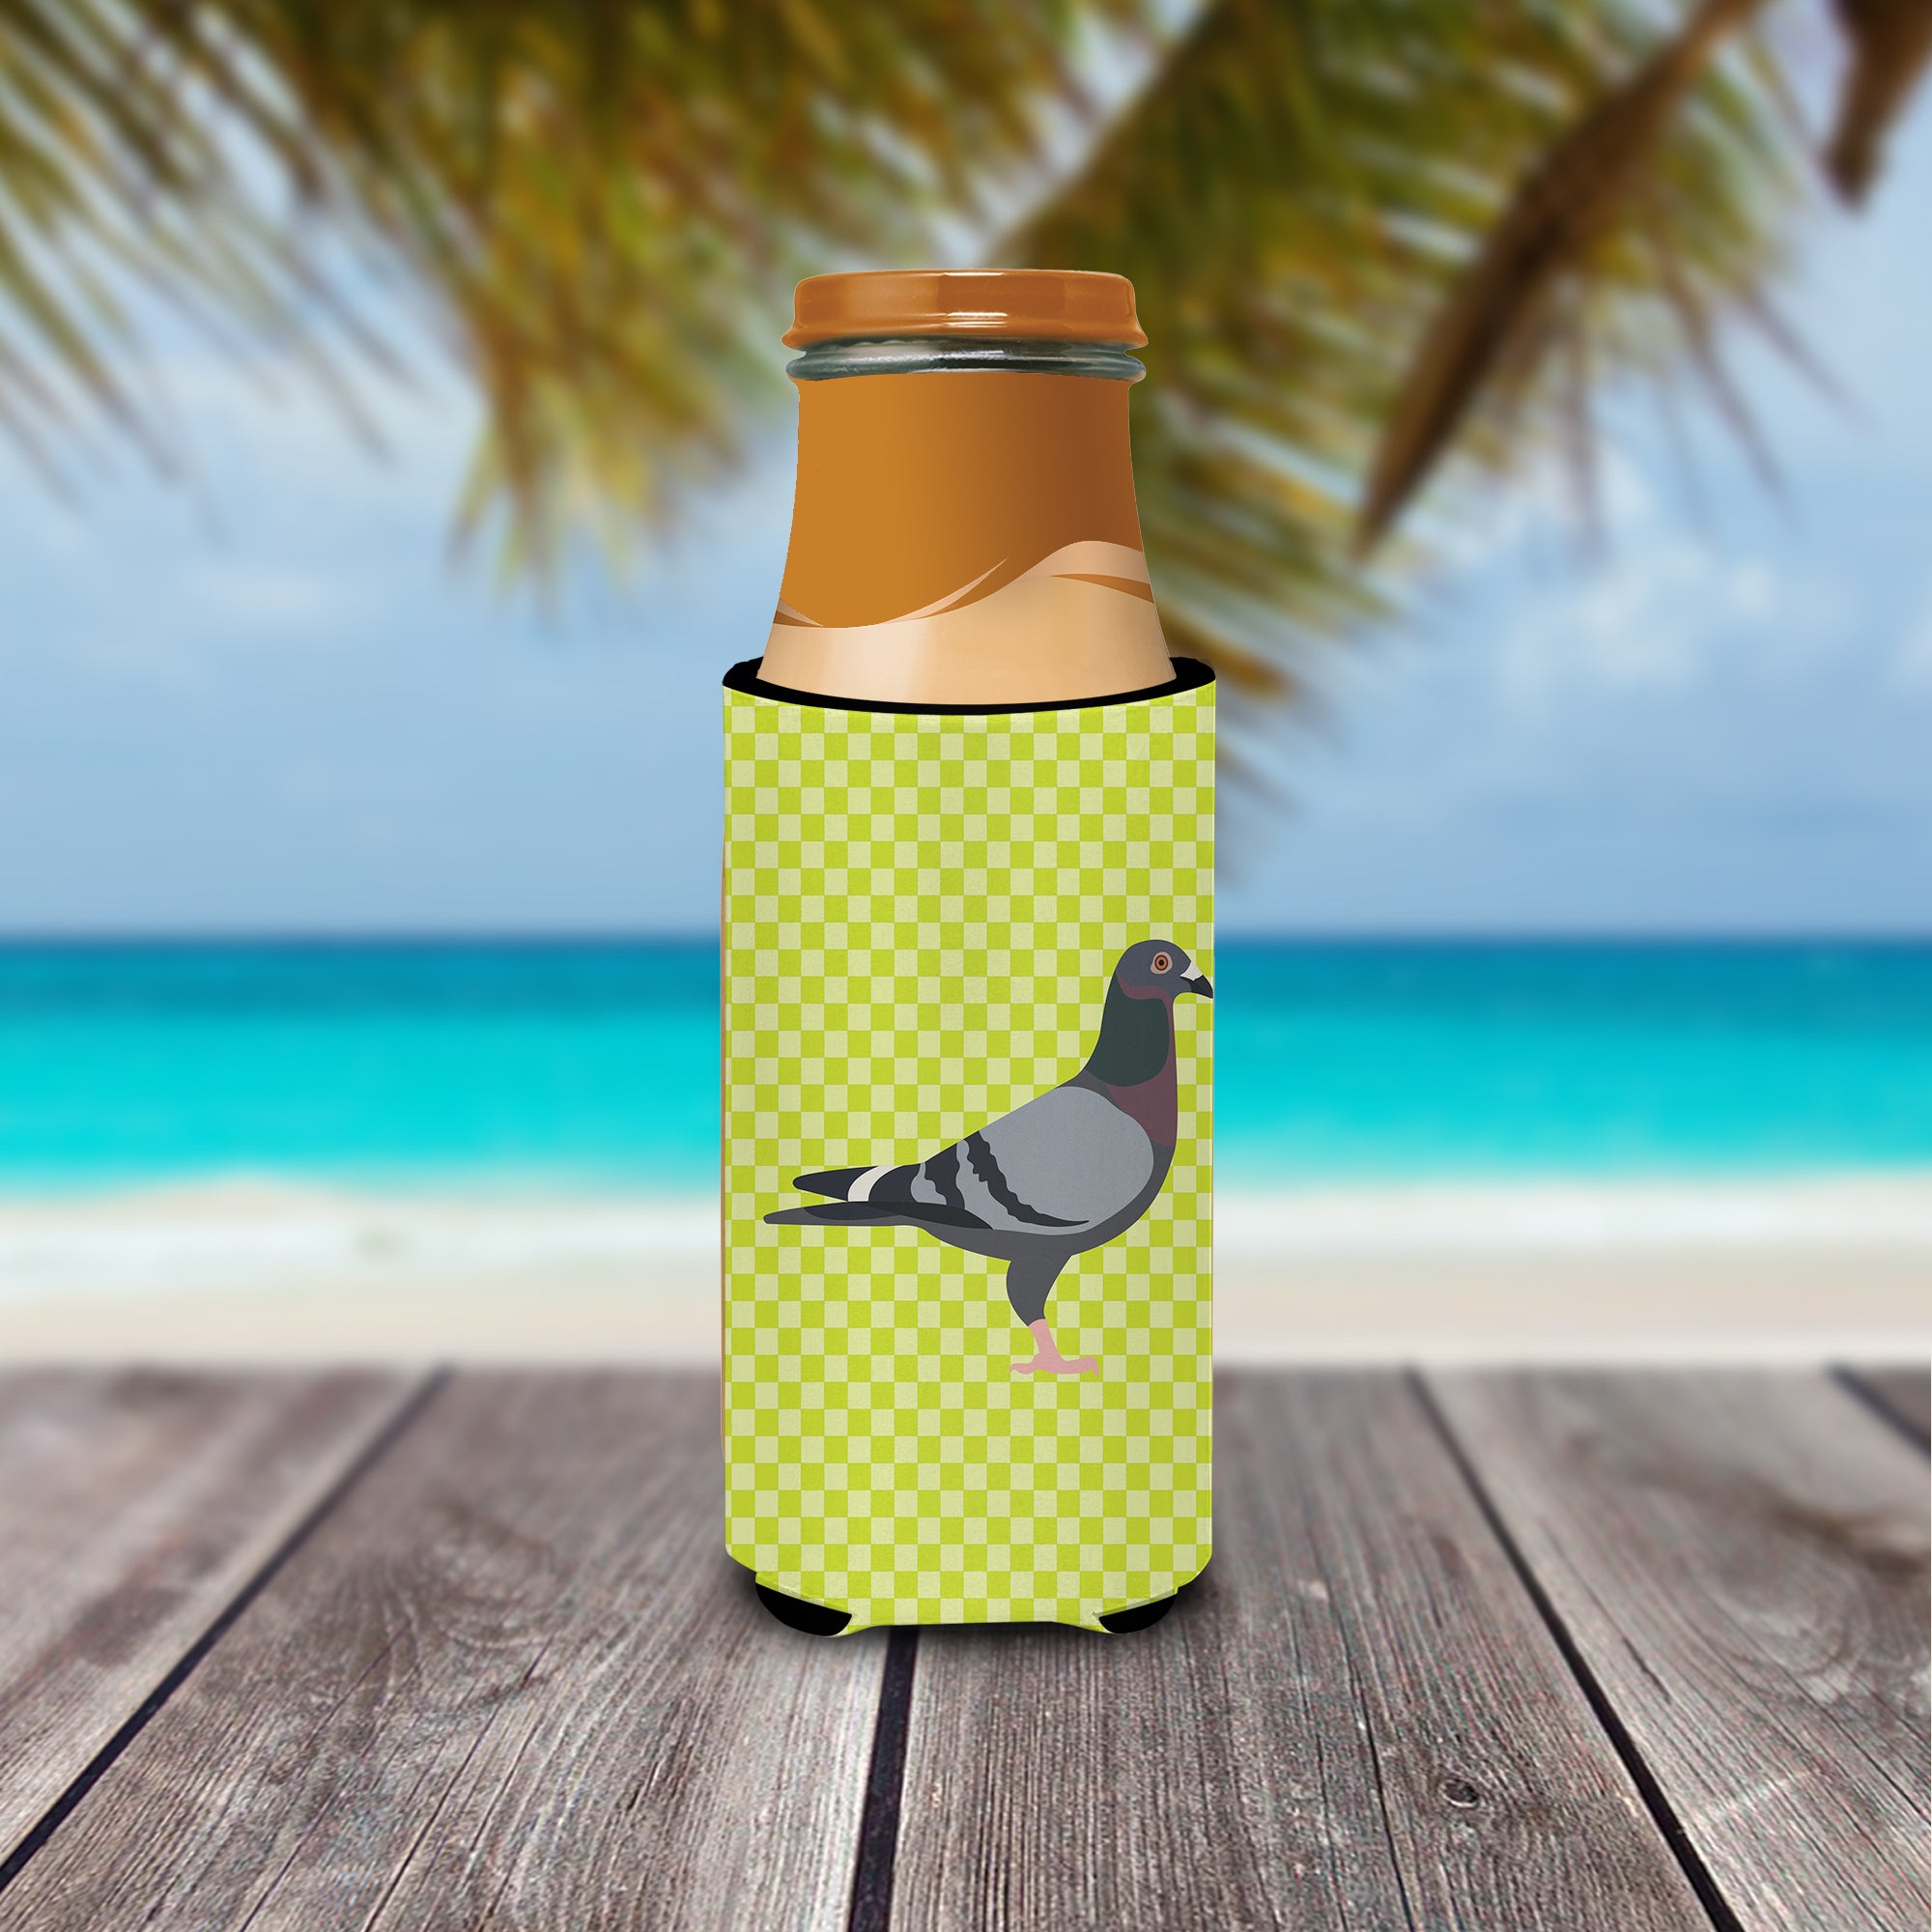 Racing Pigeon Green  Ultra Hugger for slim cans